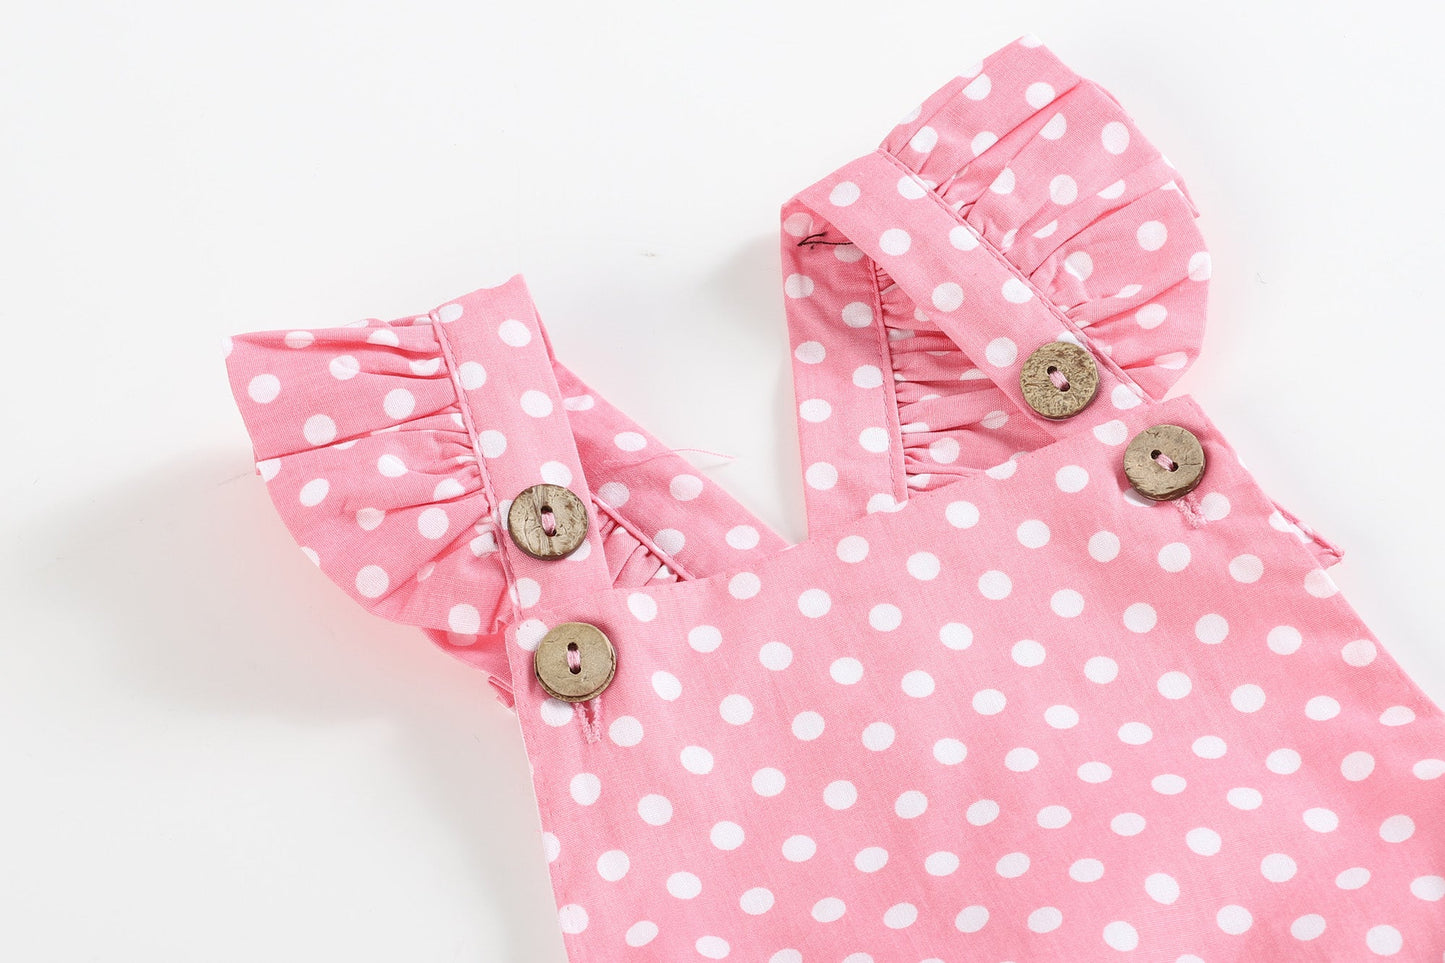 Soft Pink Dot Button and Bow Bubble Romper